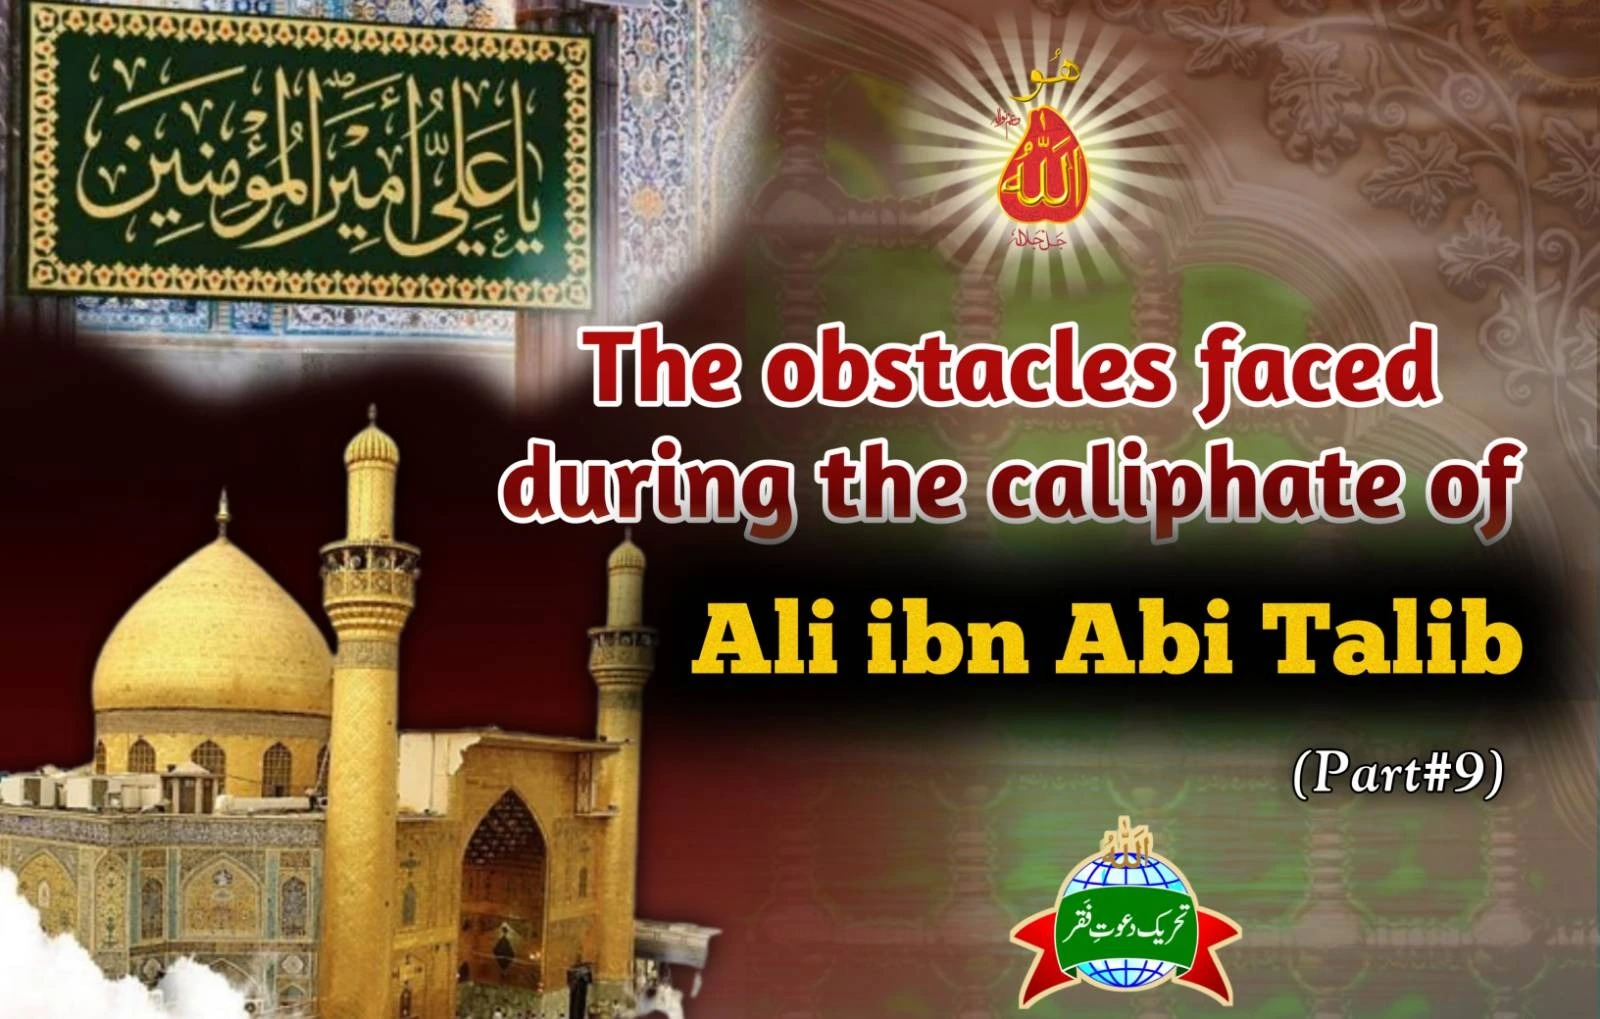 THE OBSTACLES FACED DURING THE CALIPHATE OF ALI IBN ABI TALIB